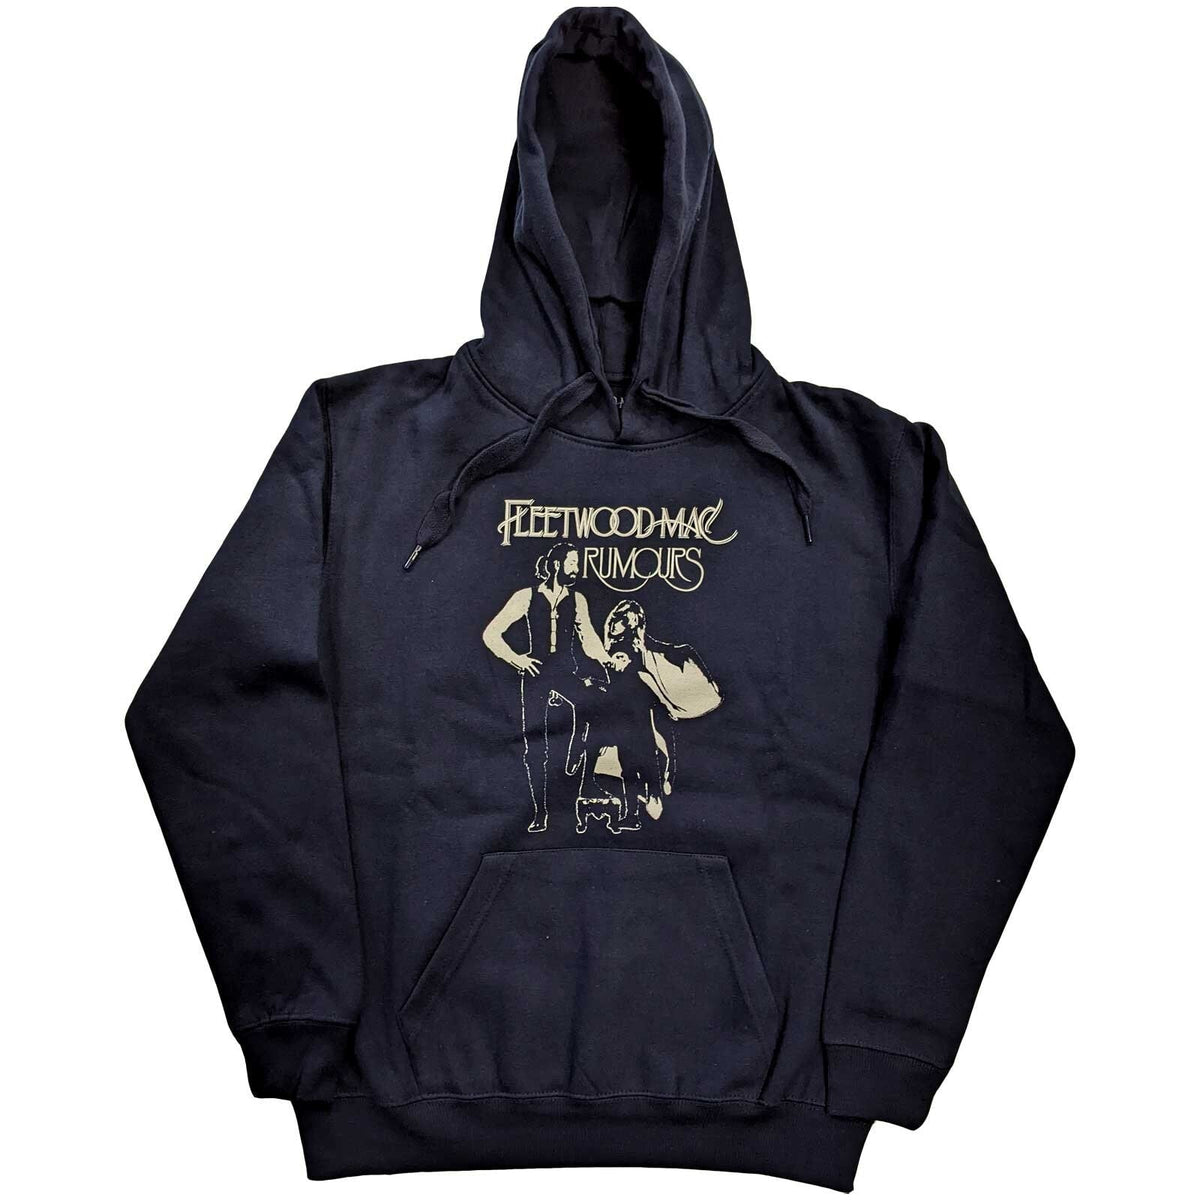 Fleetwood Mac Unisex Hoodie - Rumours - Blue Official Licensed Design - Worldwide Shipping - Jelly Frog